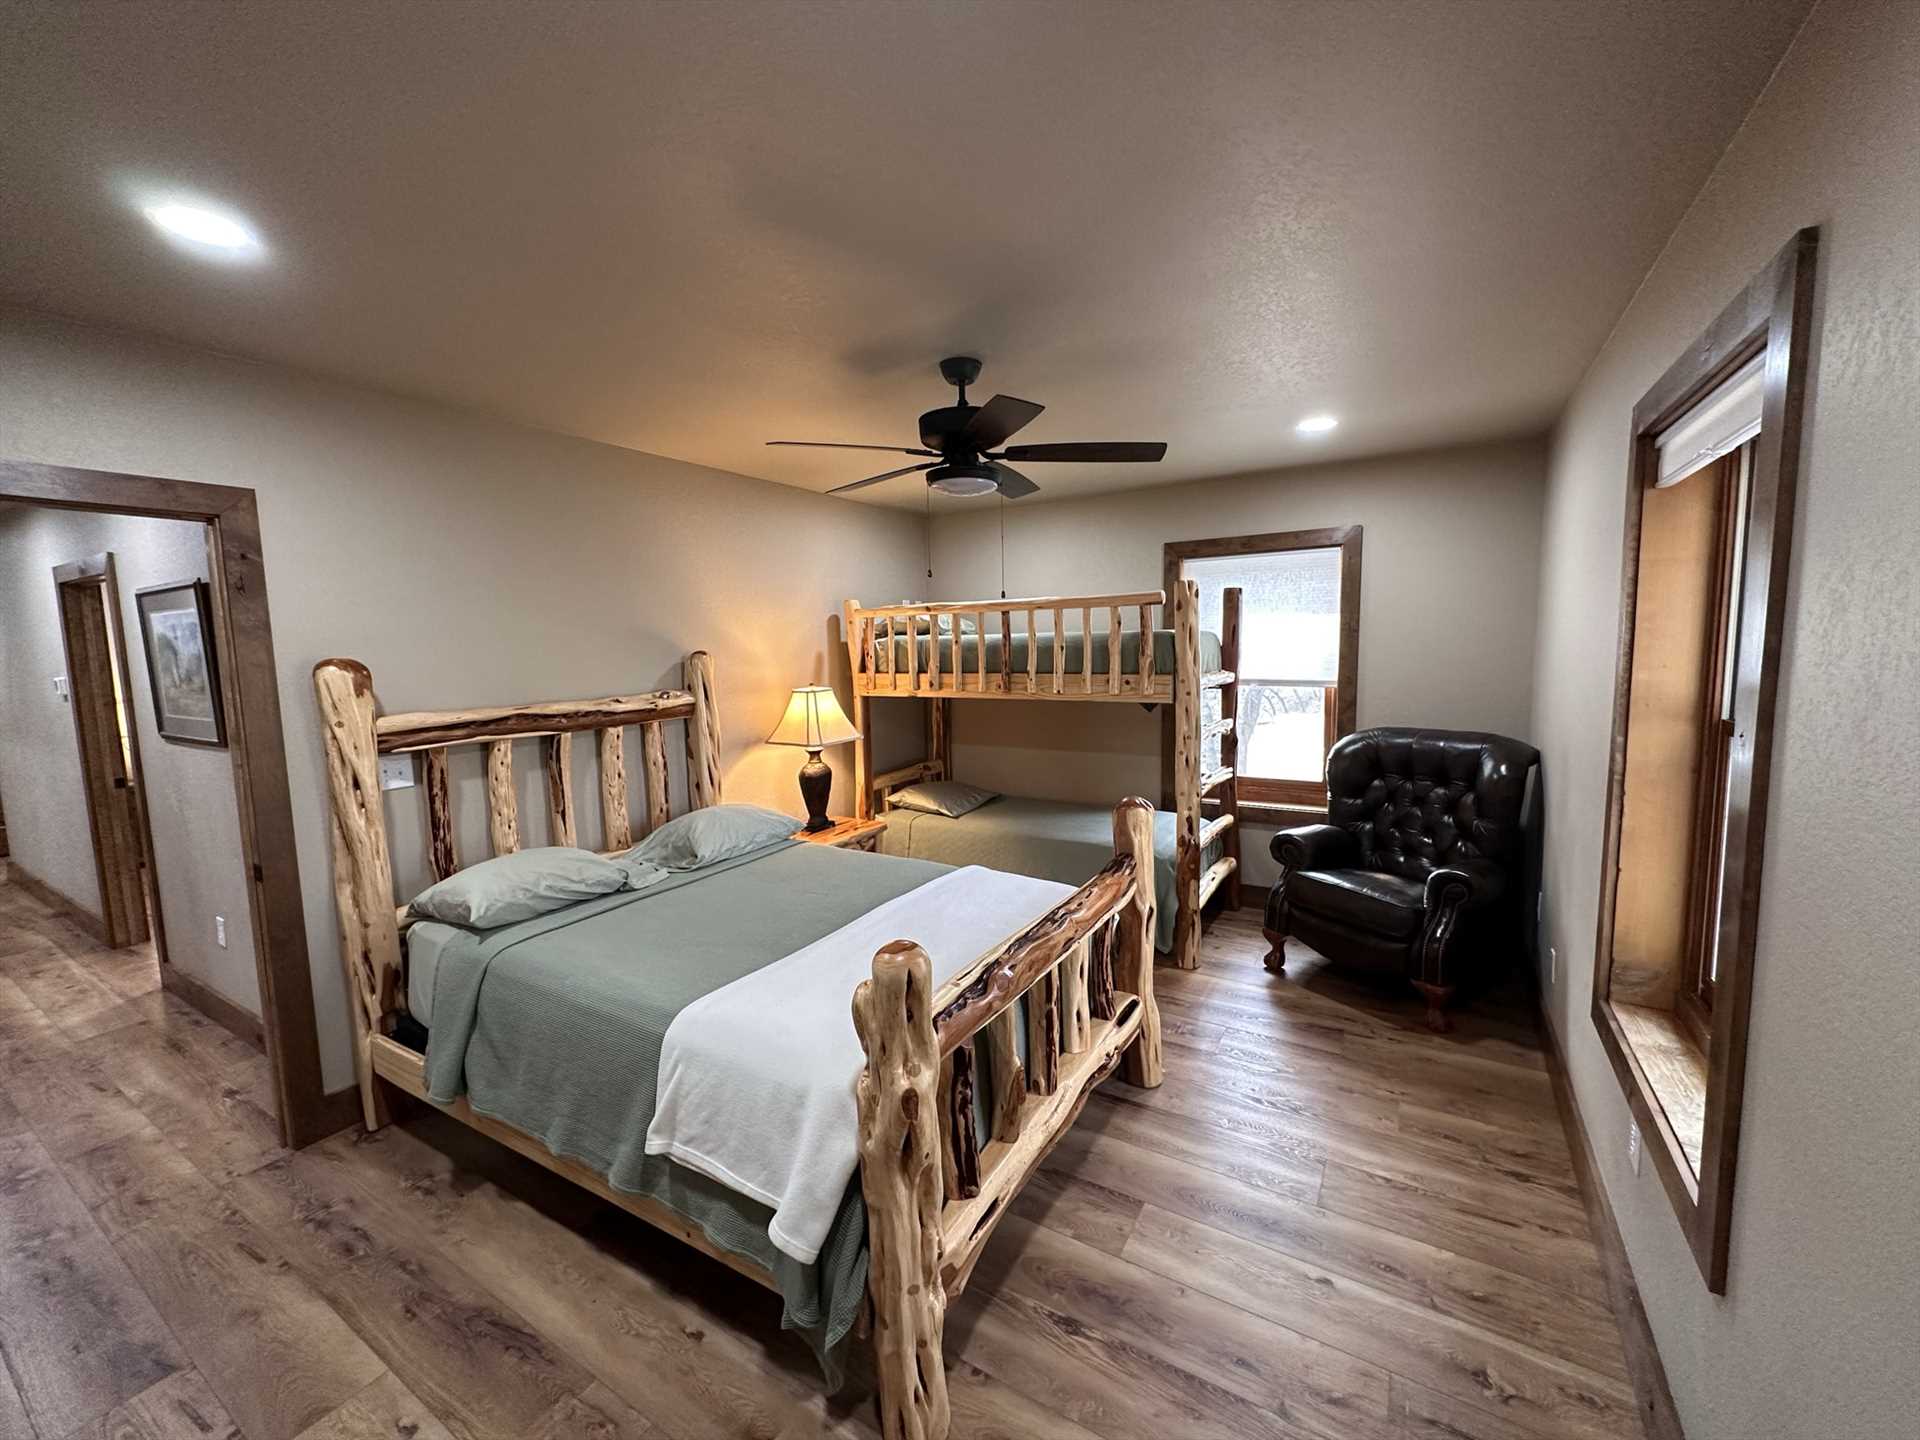                                                 The Lodge's fourth bedroom, located upstairs, comfortably sleeps four with a queen-sized bed and a twin bunk bed setup.